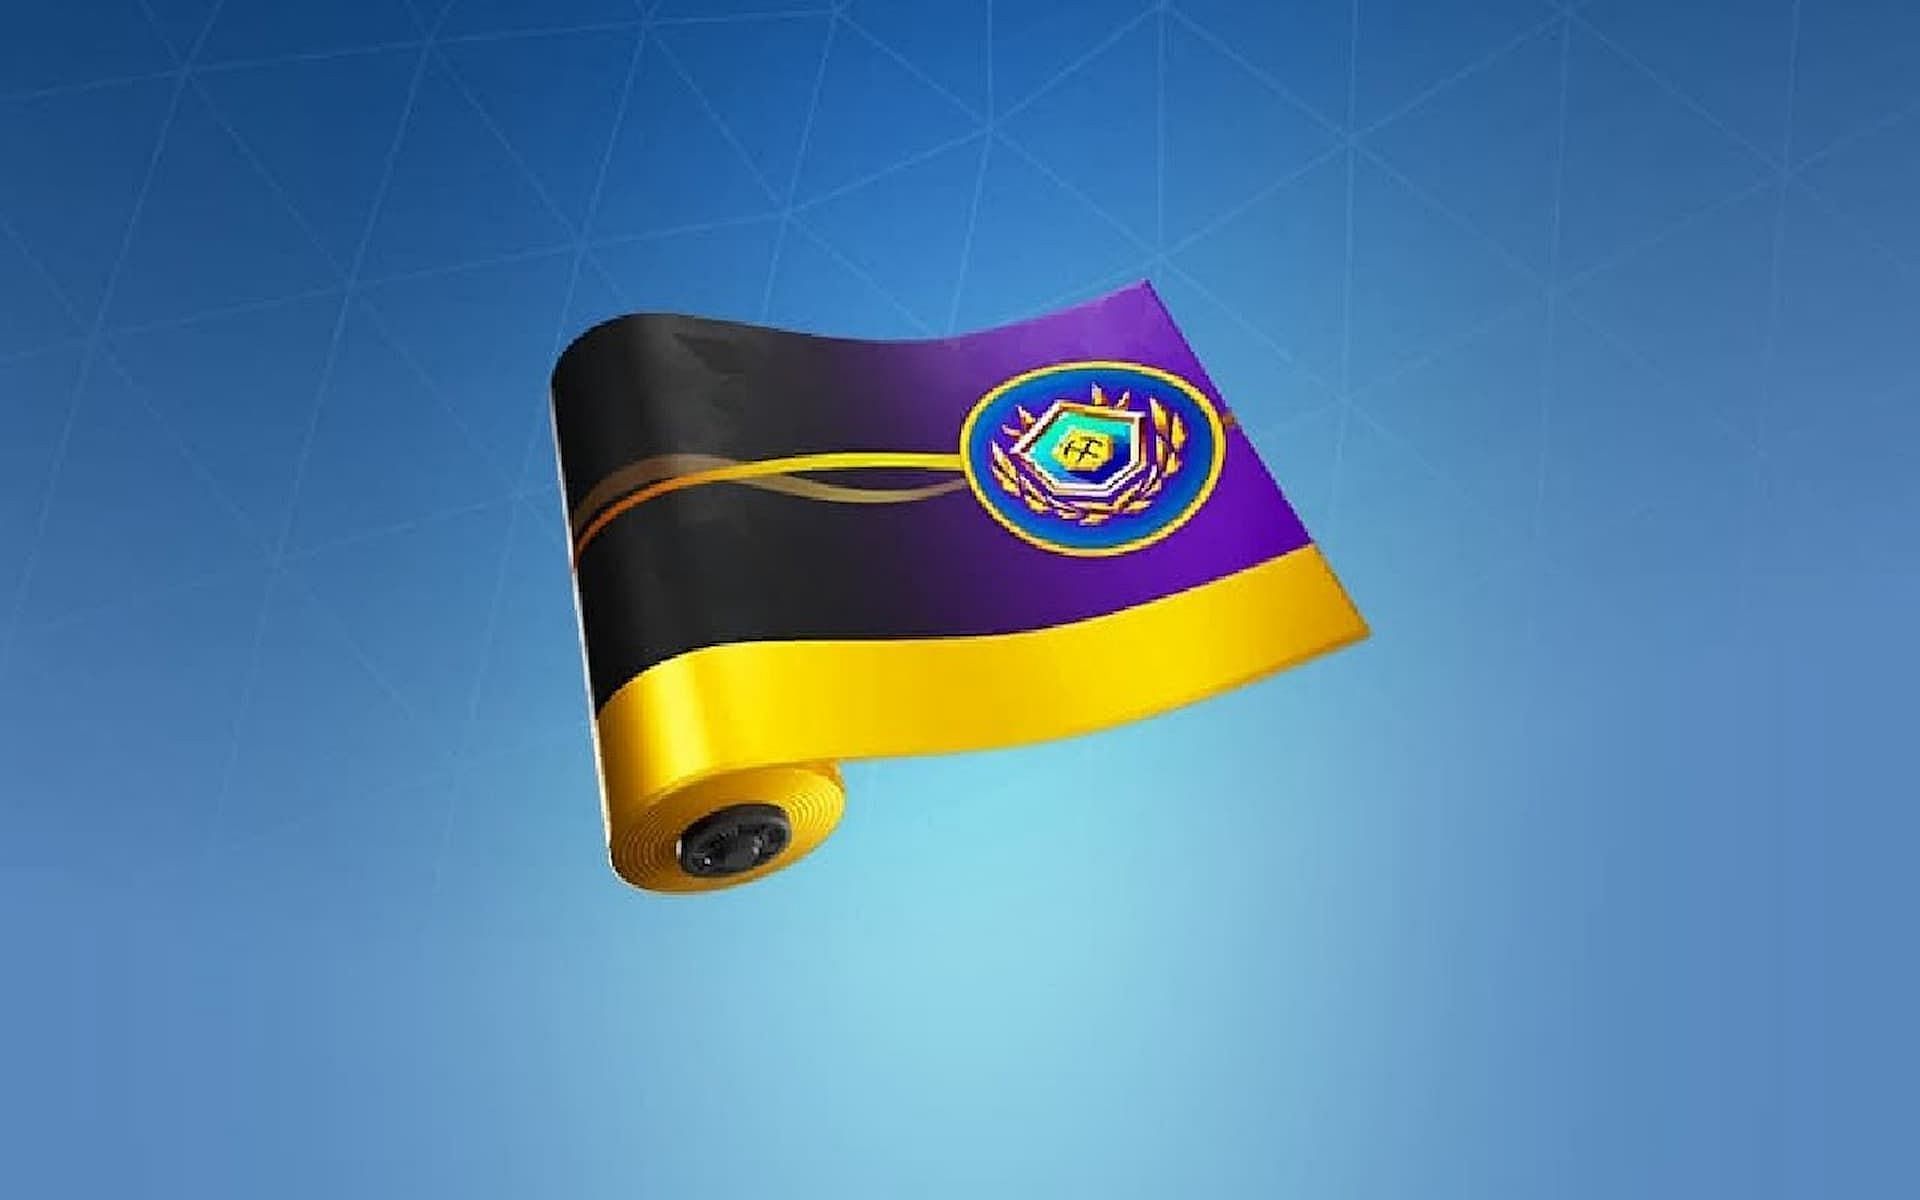 A look at the free weapon Wrap that Fortnite players can now receive (Image via Epic Games)